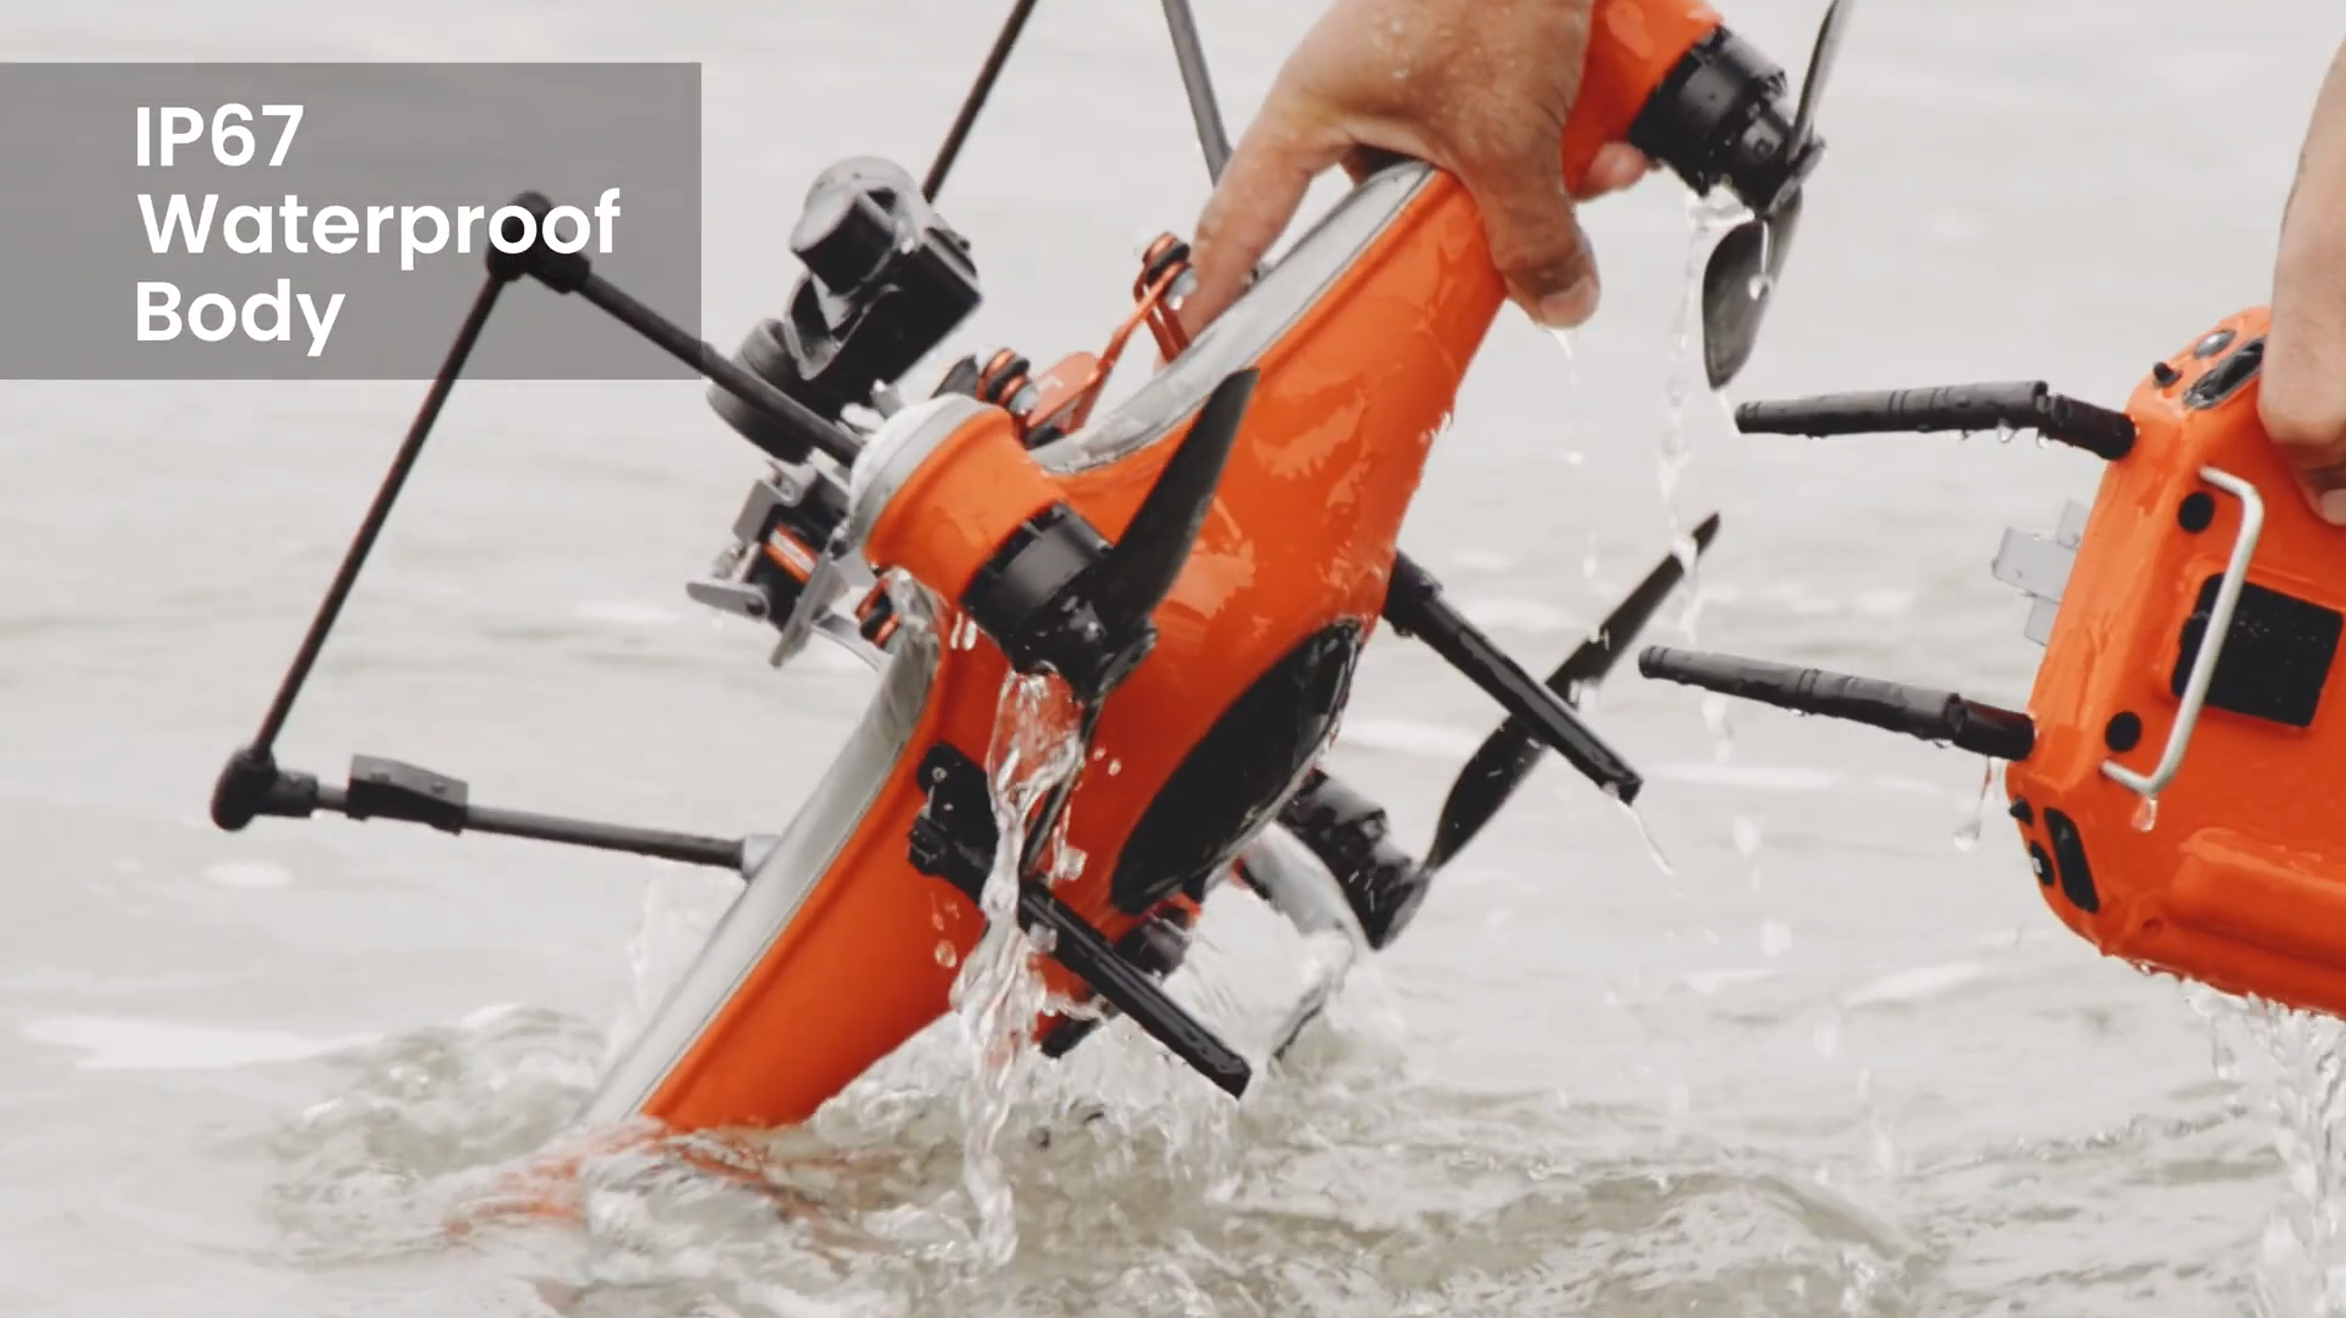 Load video: Introducing SplashDrone 4 - the Most Advanced Waterproof Drone Ever